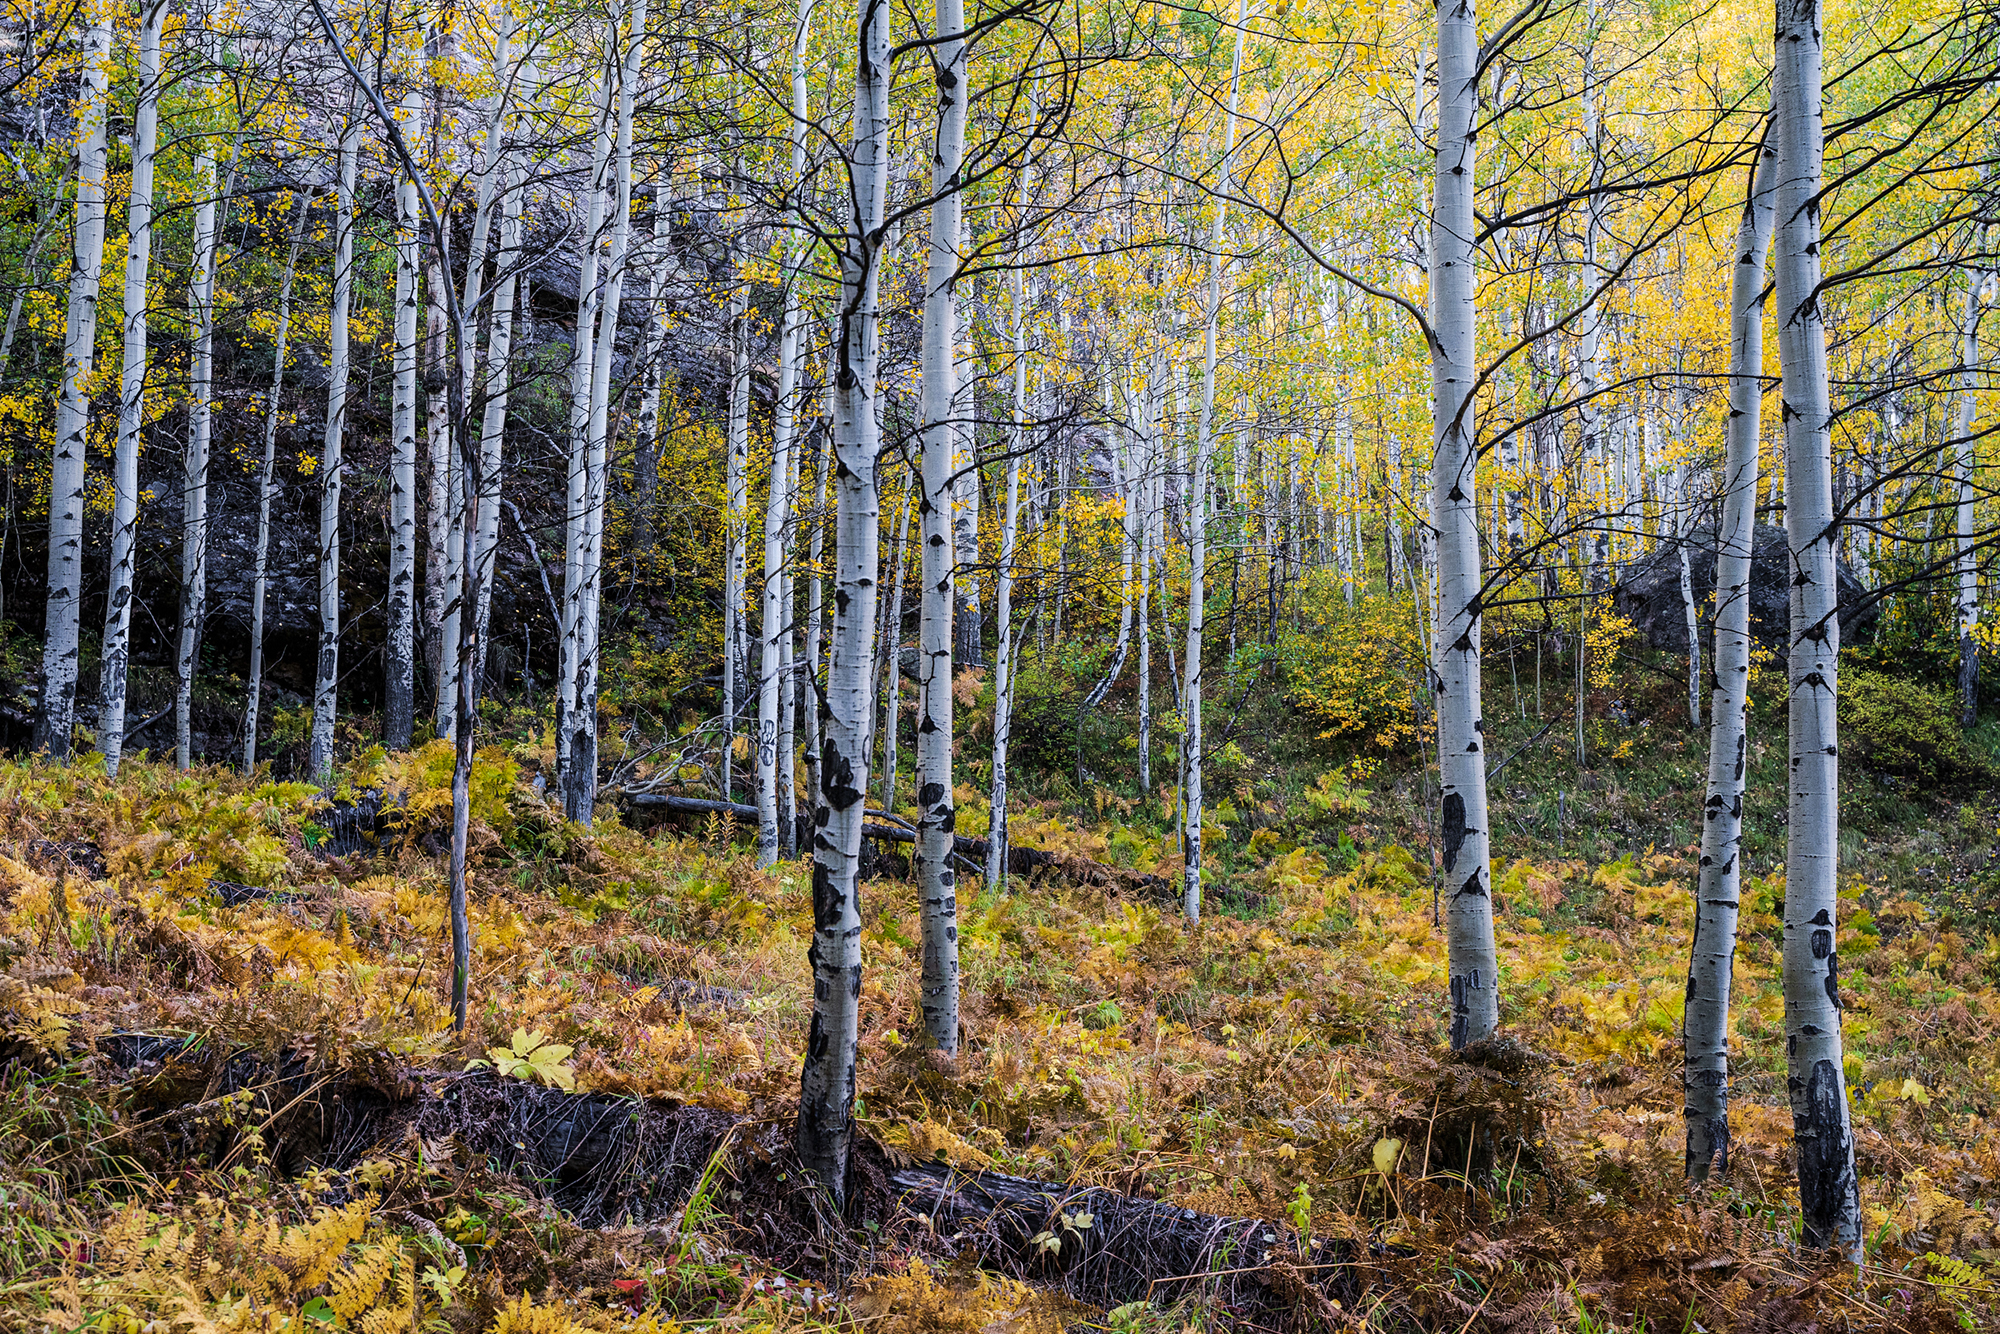 Birch trees with yellow foliage and leaves on ground